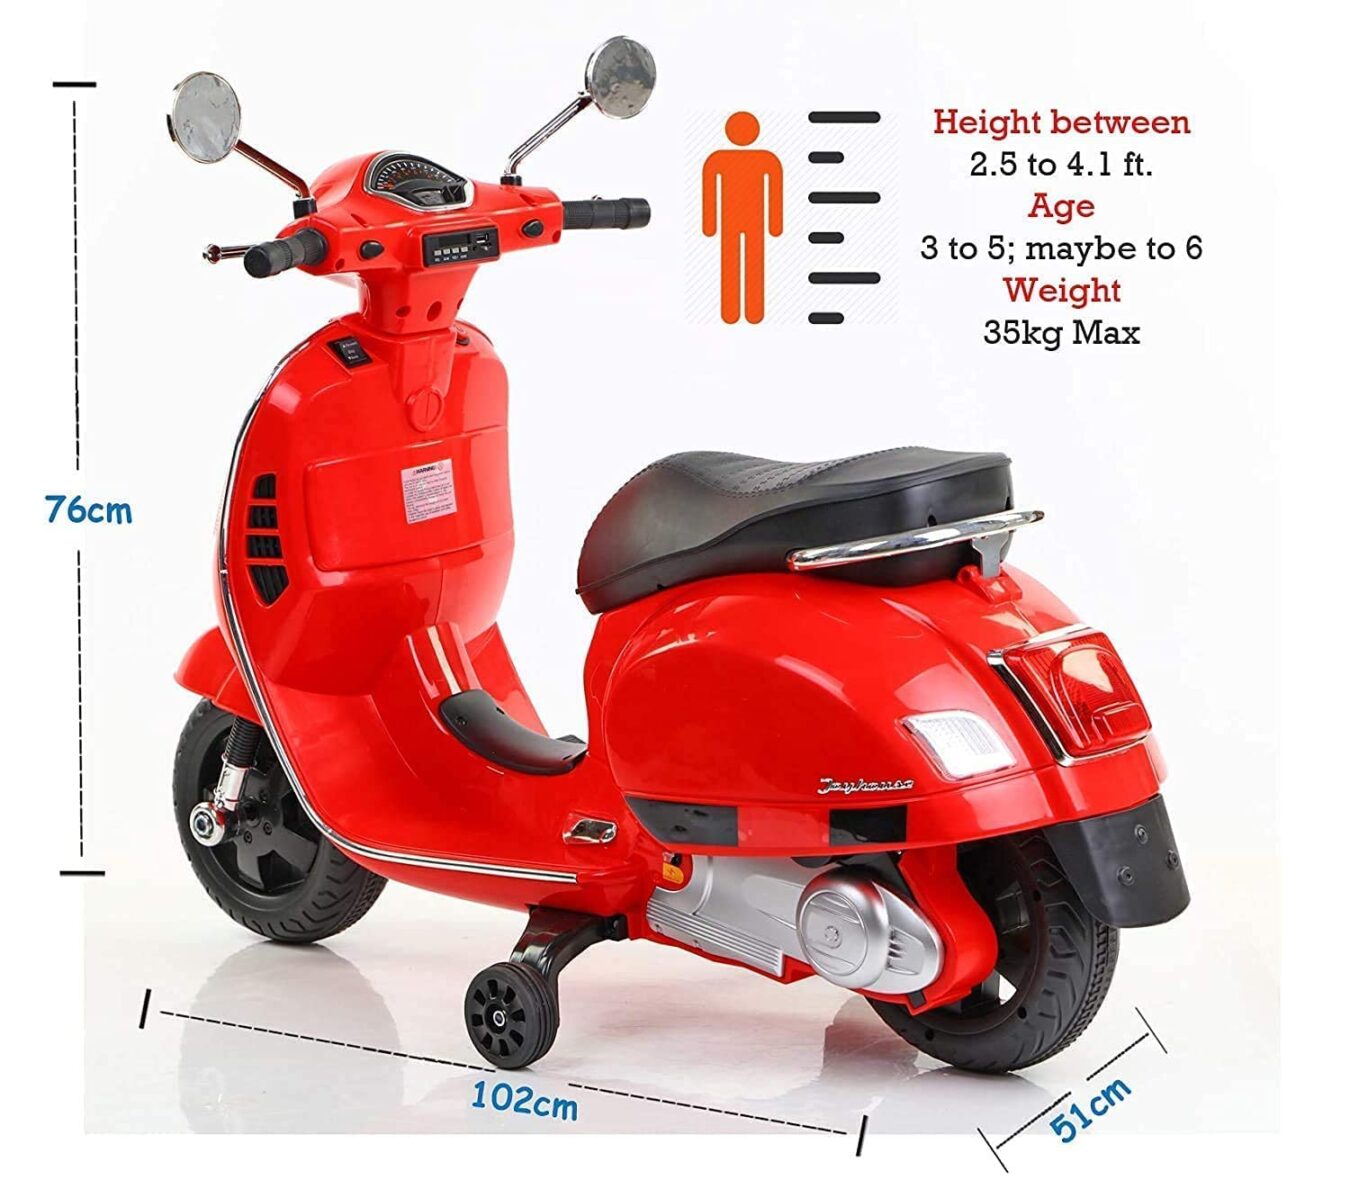 U Smile Vespa 12v Battery Operated Rechargeable Ride On Scooter for Kids, 2 to 6 Years red